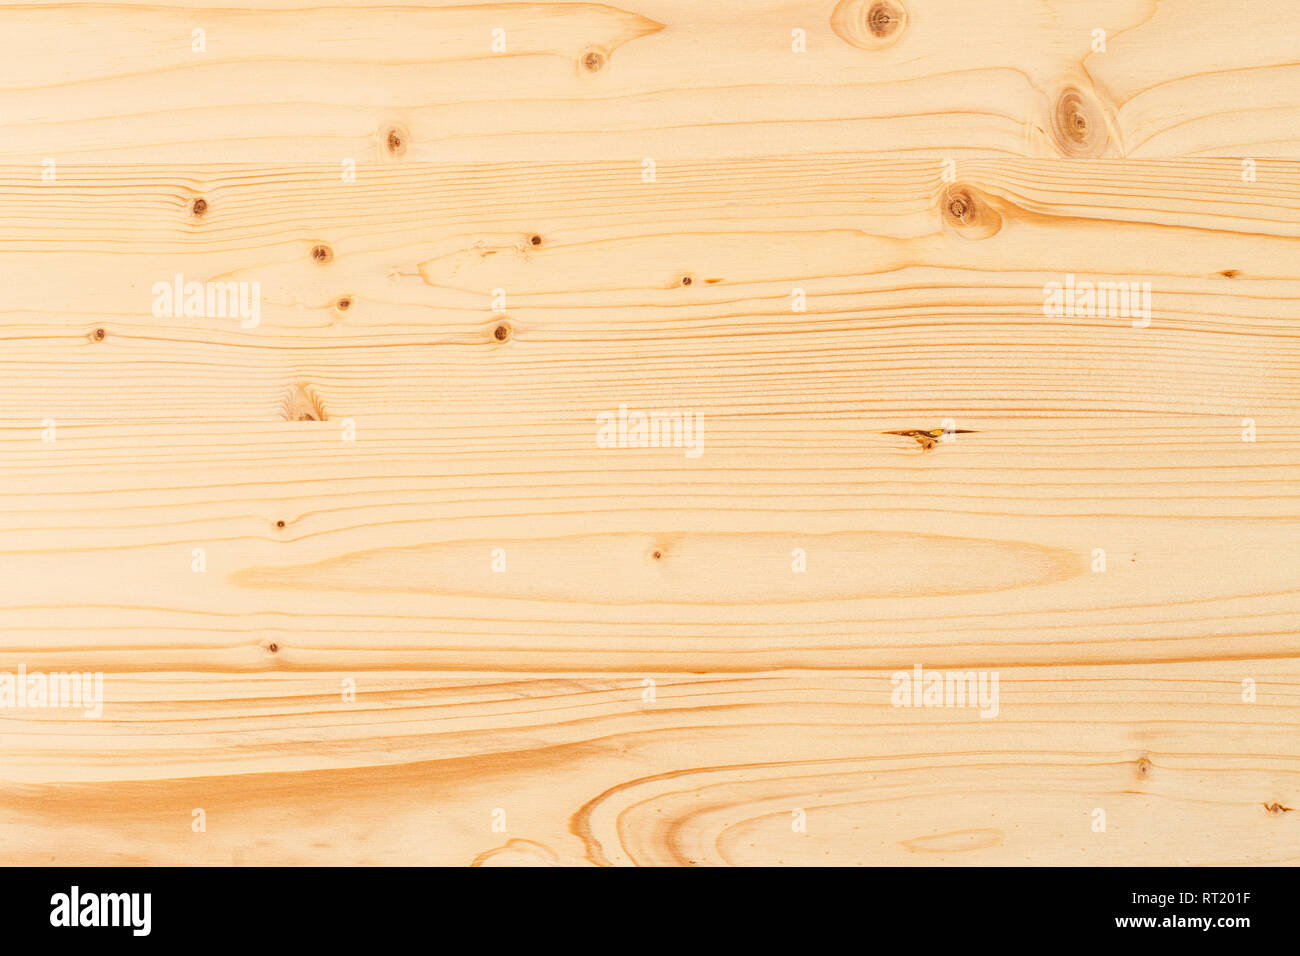 Pine wood texture as background Stock Photo